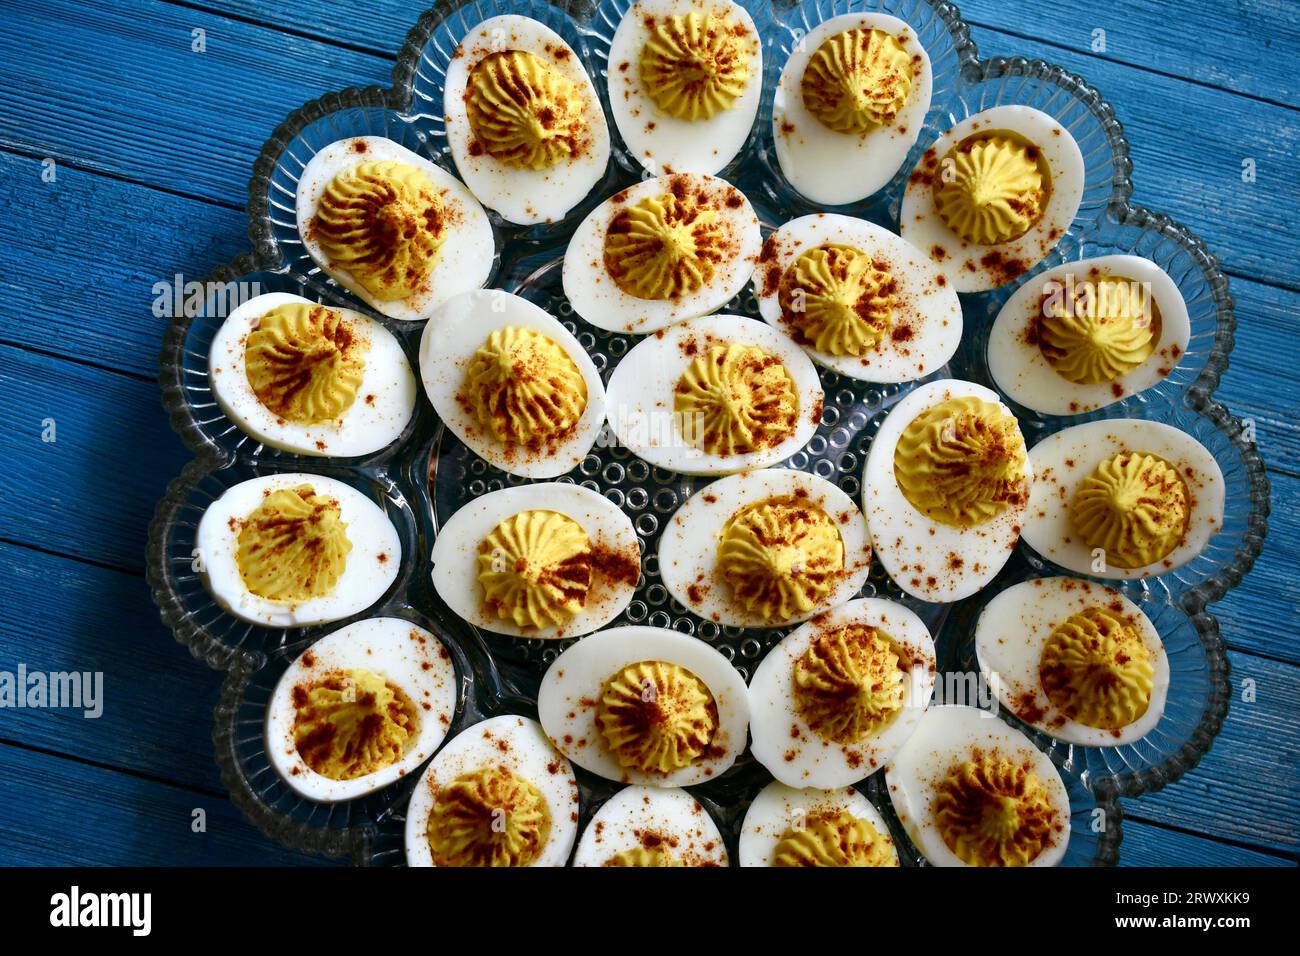 Deviled eggs in a decorative glass dish on a bright blue wooden background viewed from above Stock Photo